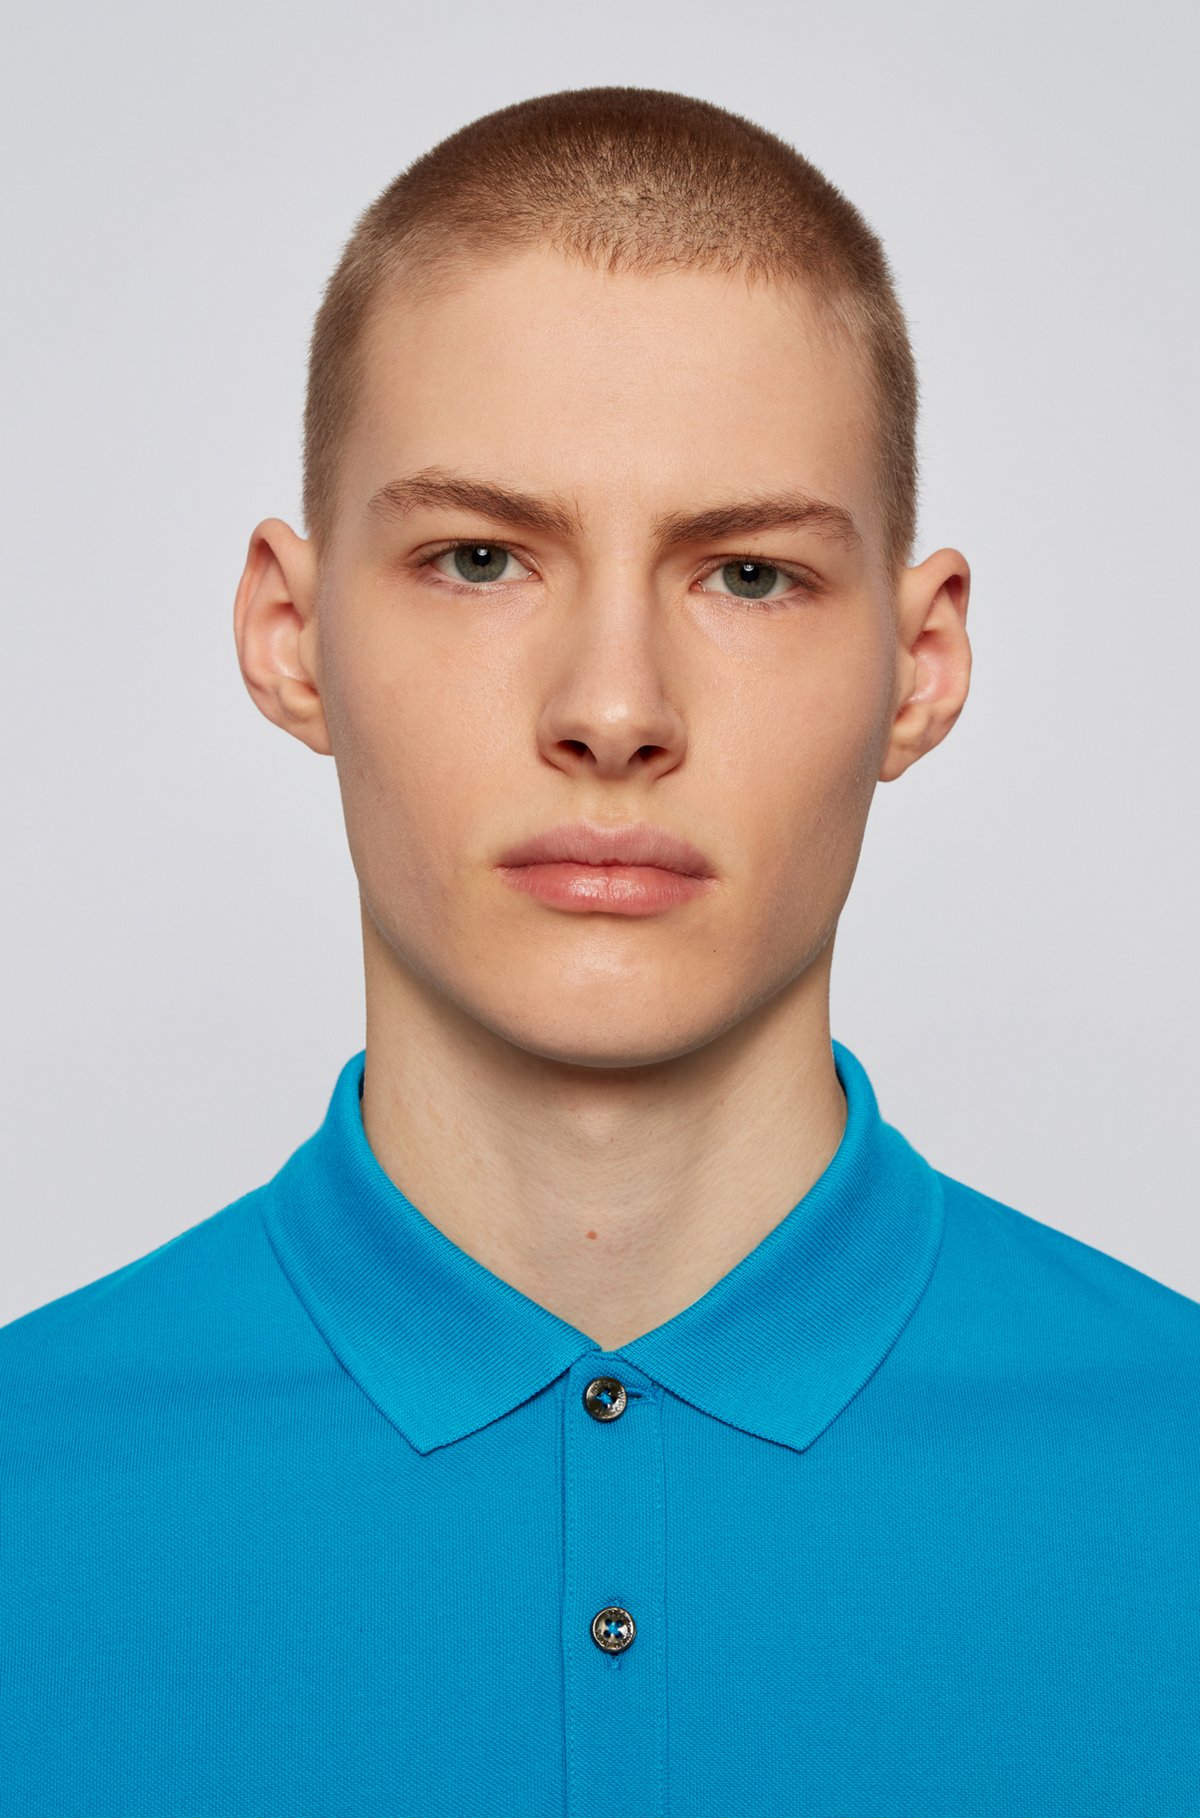 Regular-fit polo shirt in Pima-cotton piqué, Turquoise